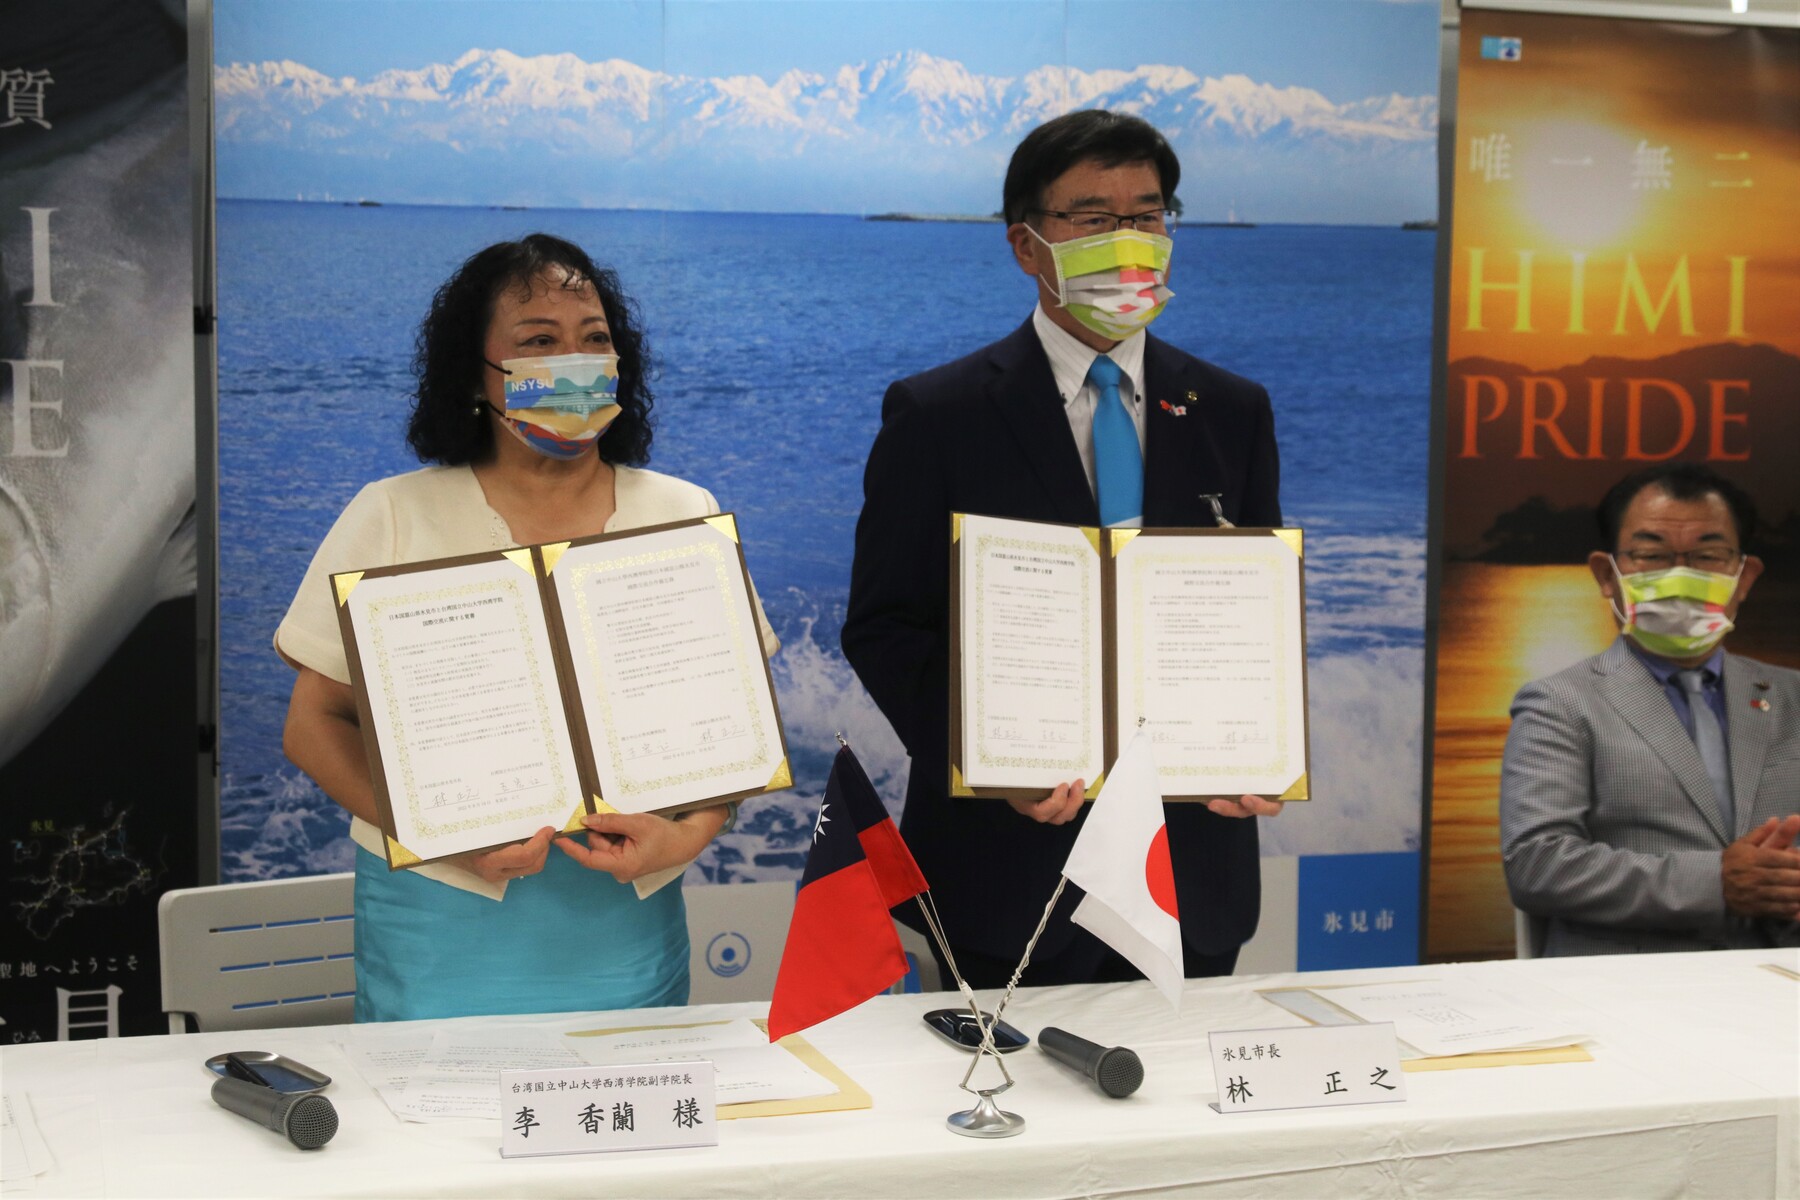 NSYSU signed MOU with Himi City Office, Toyama Prefecture. The official document was signed by Virginia Shen, associate dean of the Si Wan College of NSYSU, and Masayuki Hayashi, mayor of Himi City, Japan.